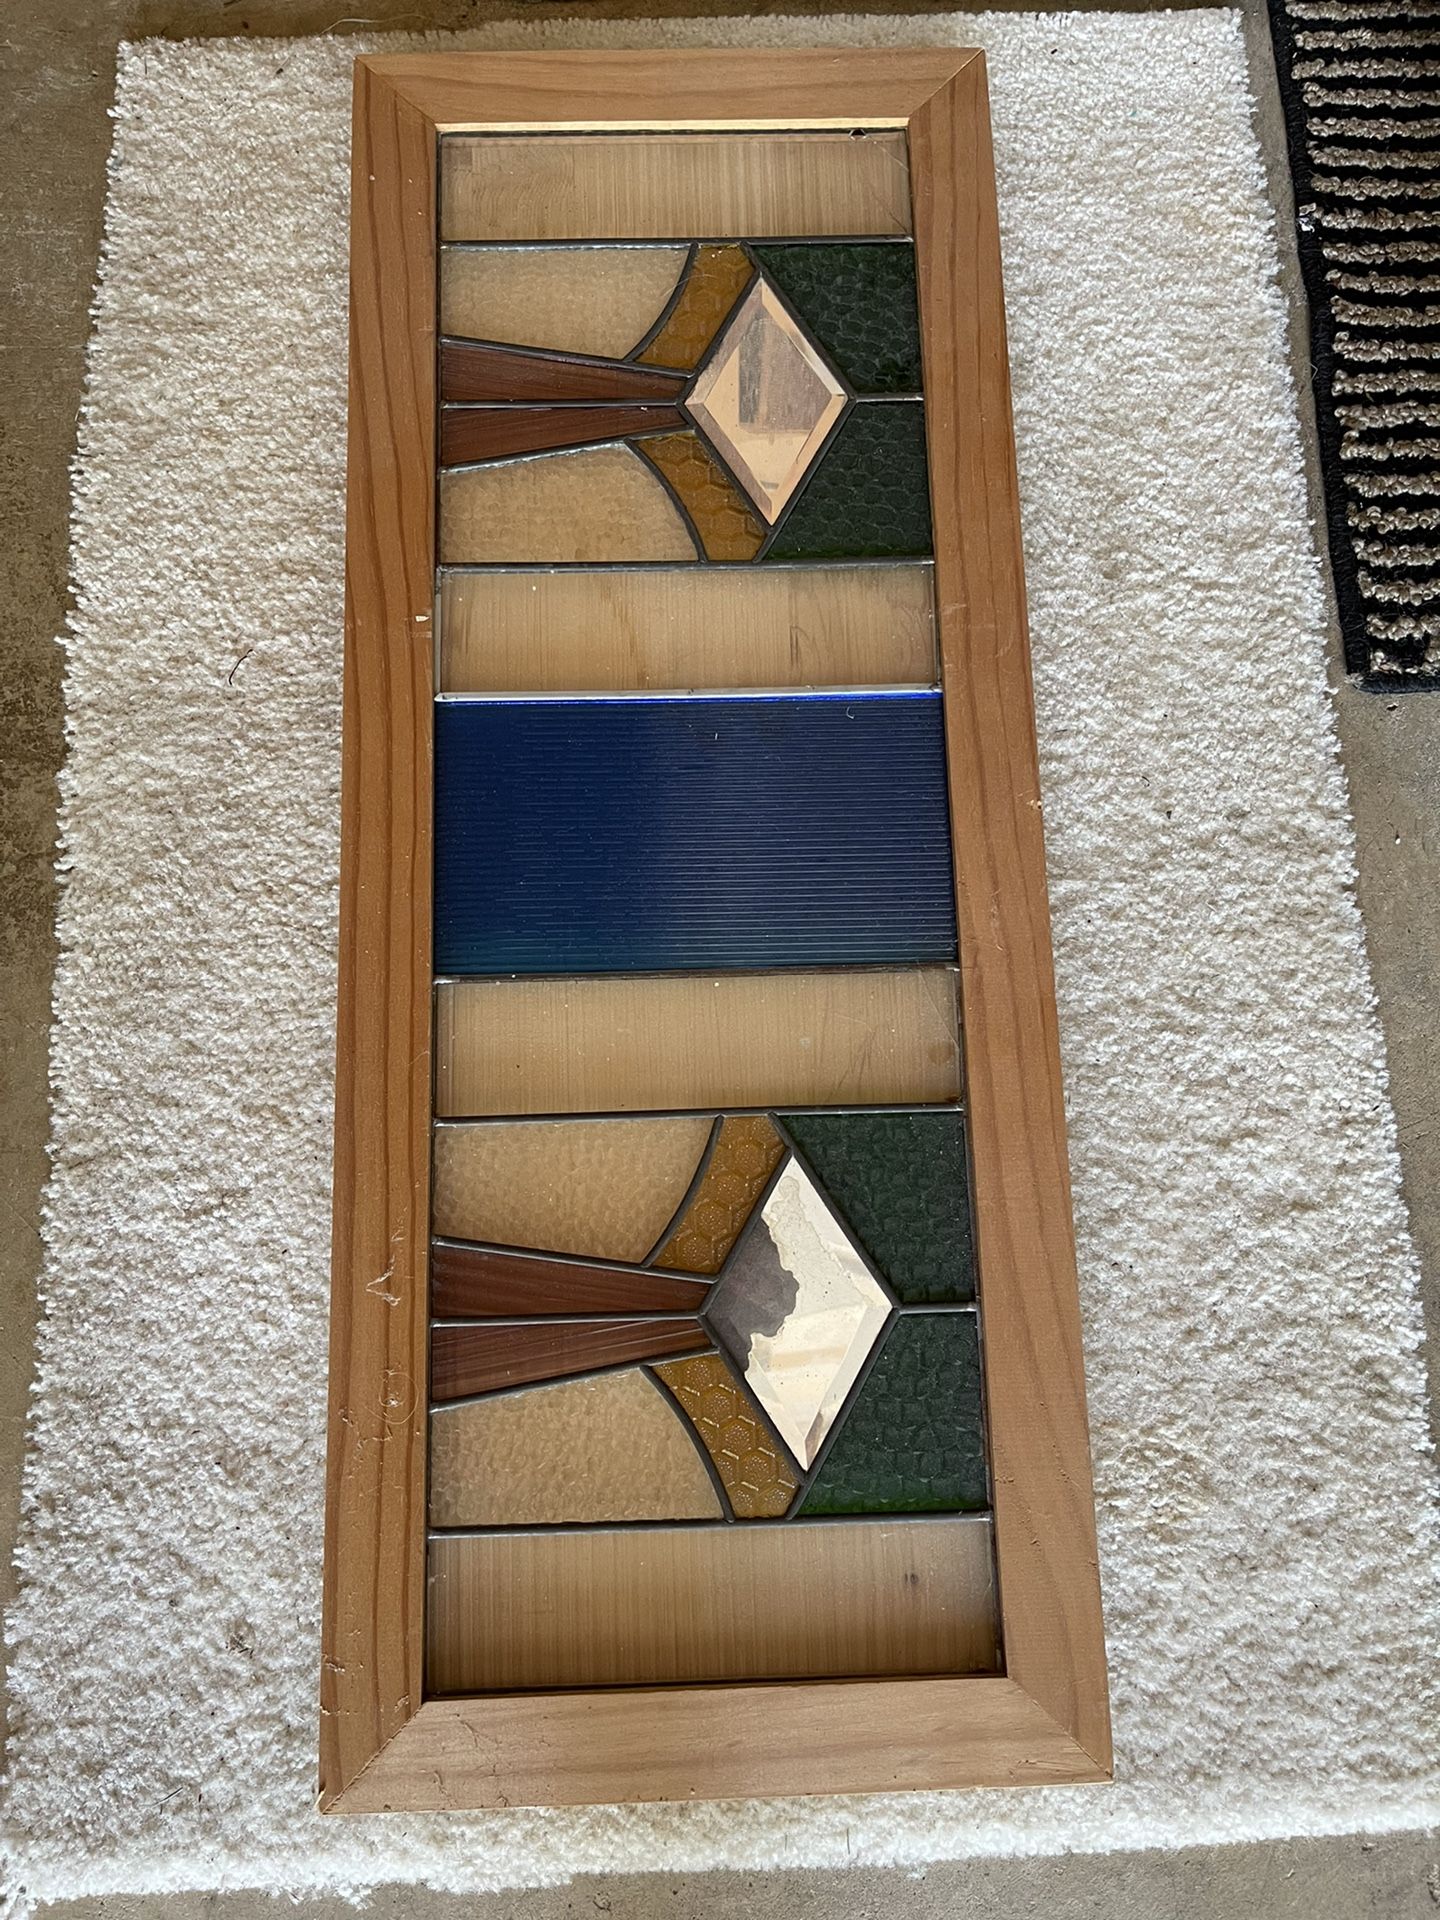 FREE -3 Pices Of Stained Glass, Framed  14x20 (2) & 31.75x12.5 (1)